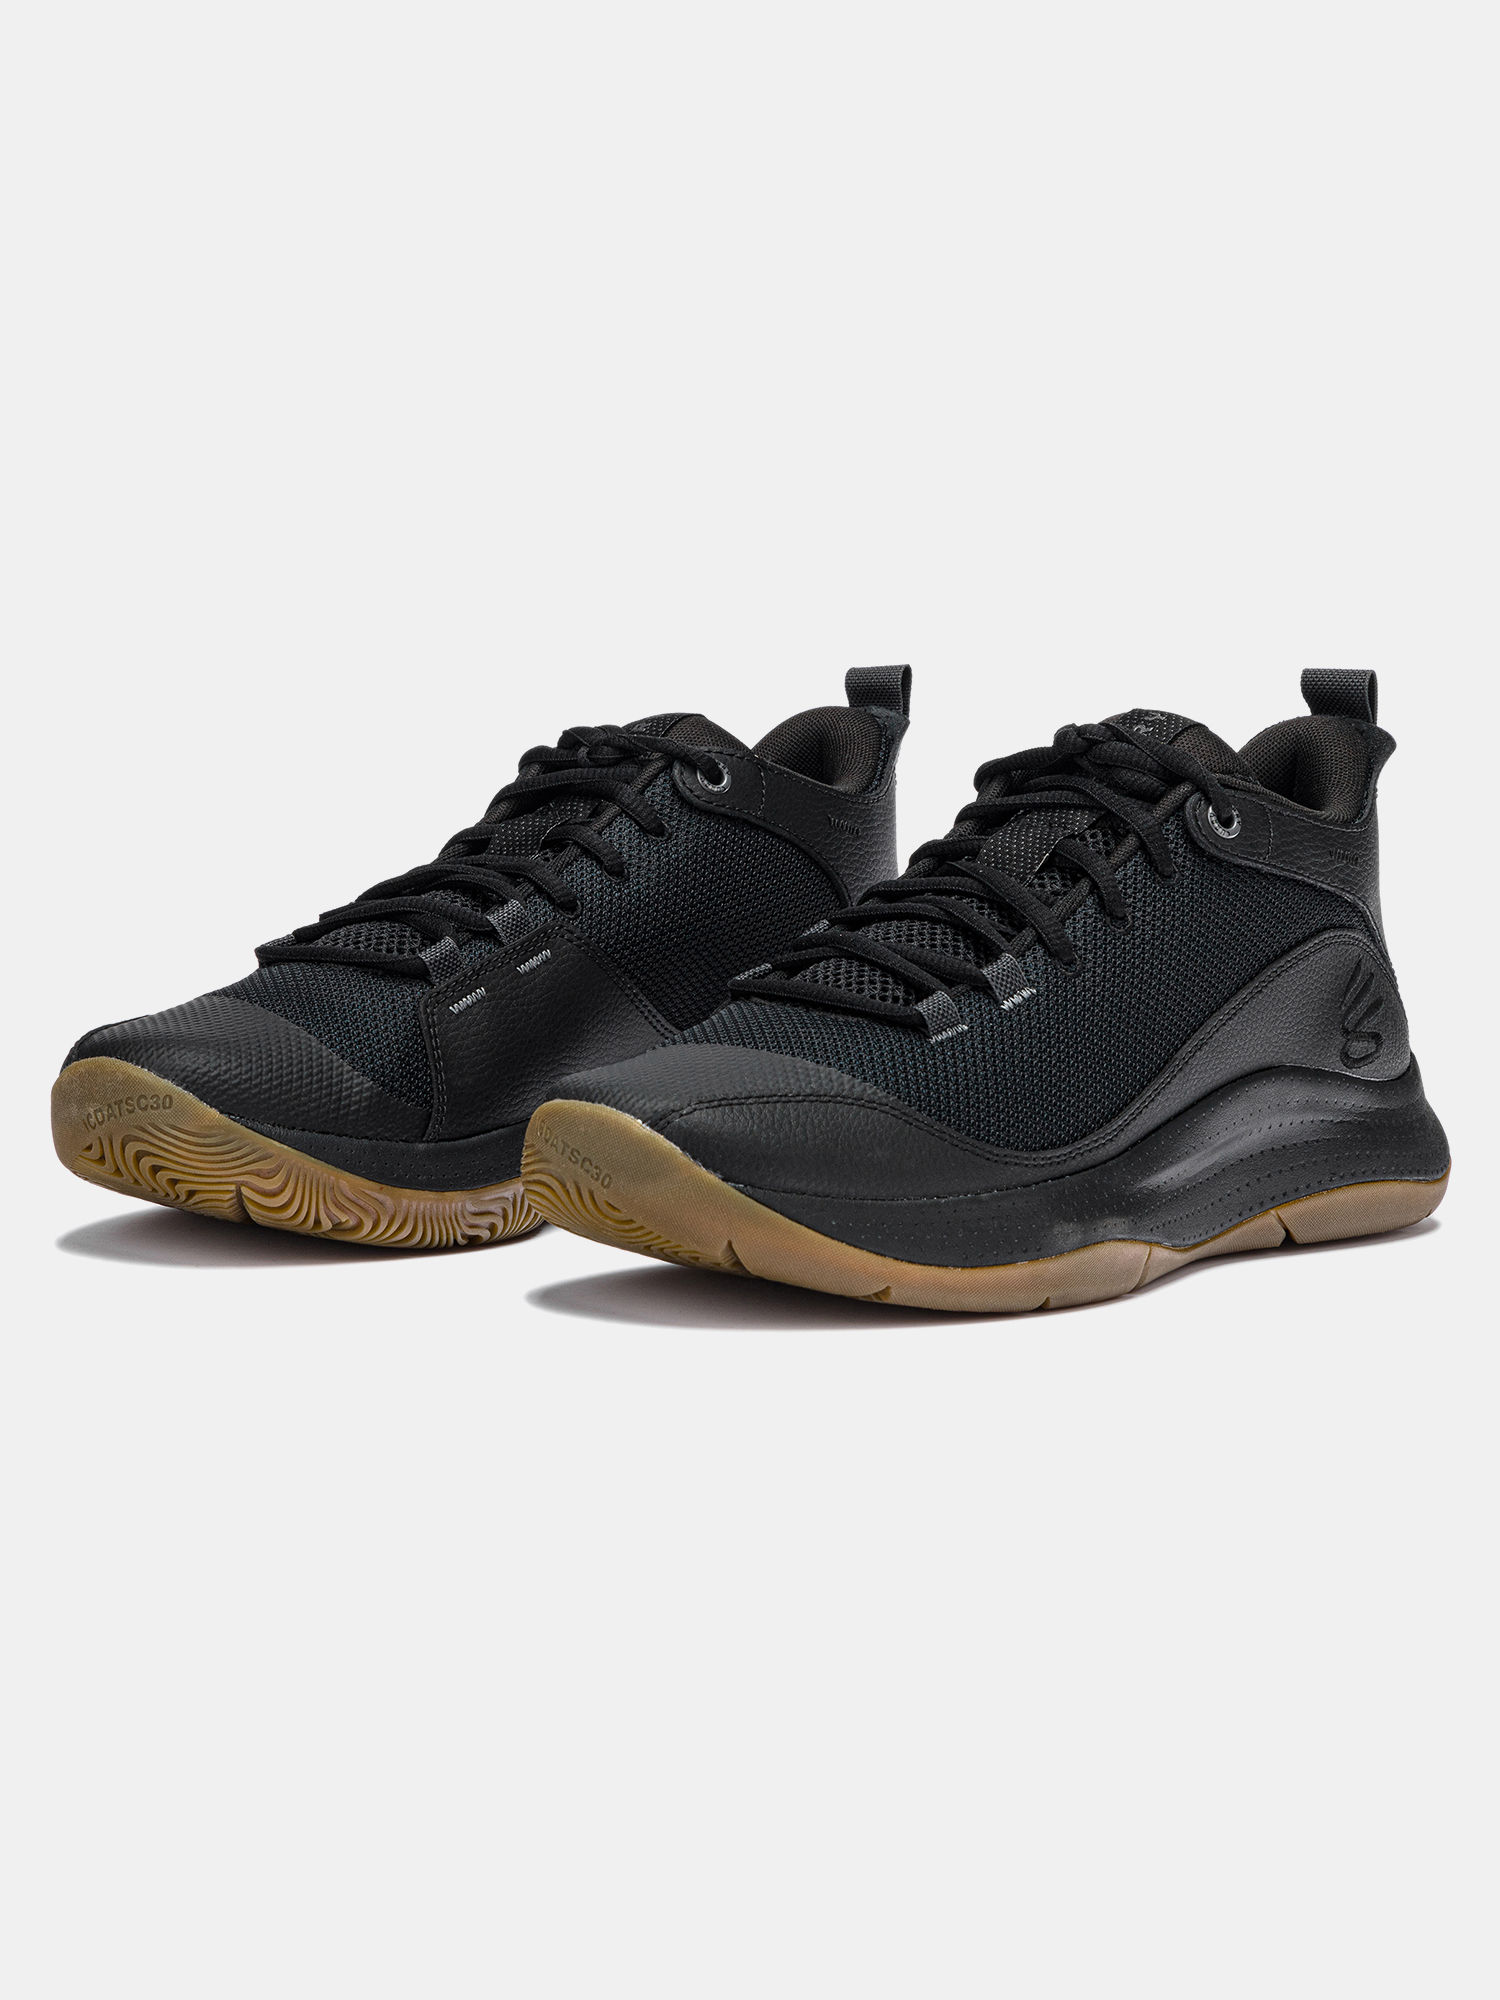 Boty Under Armour 3Z5-BLK (3)